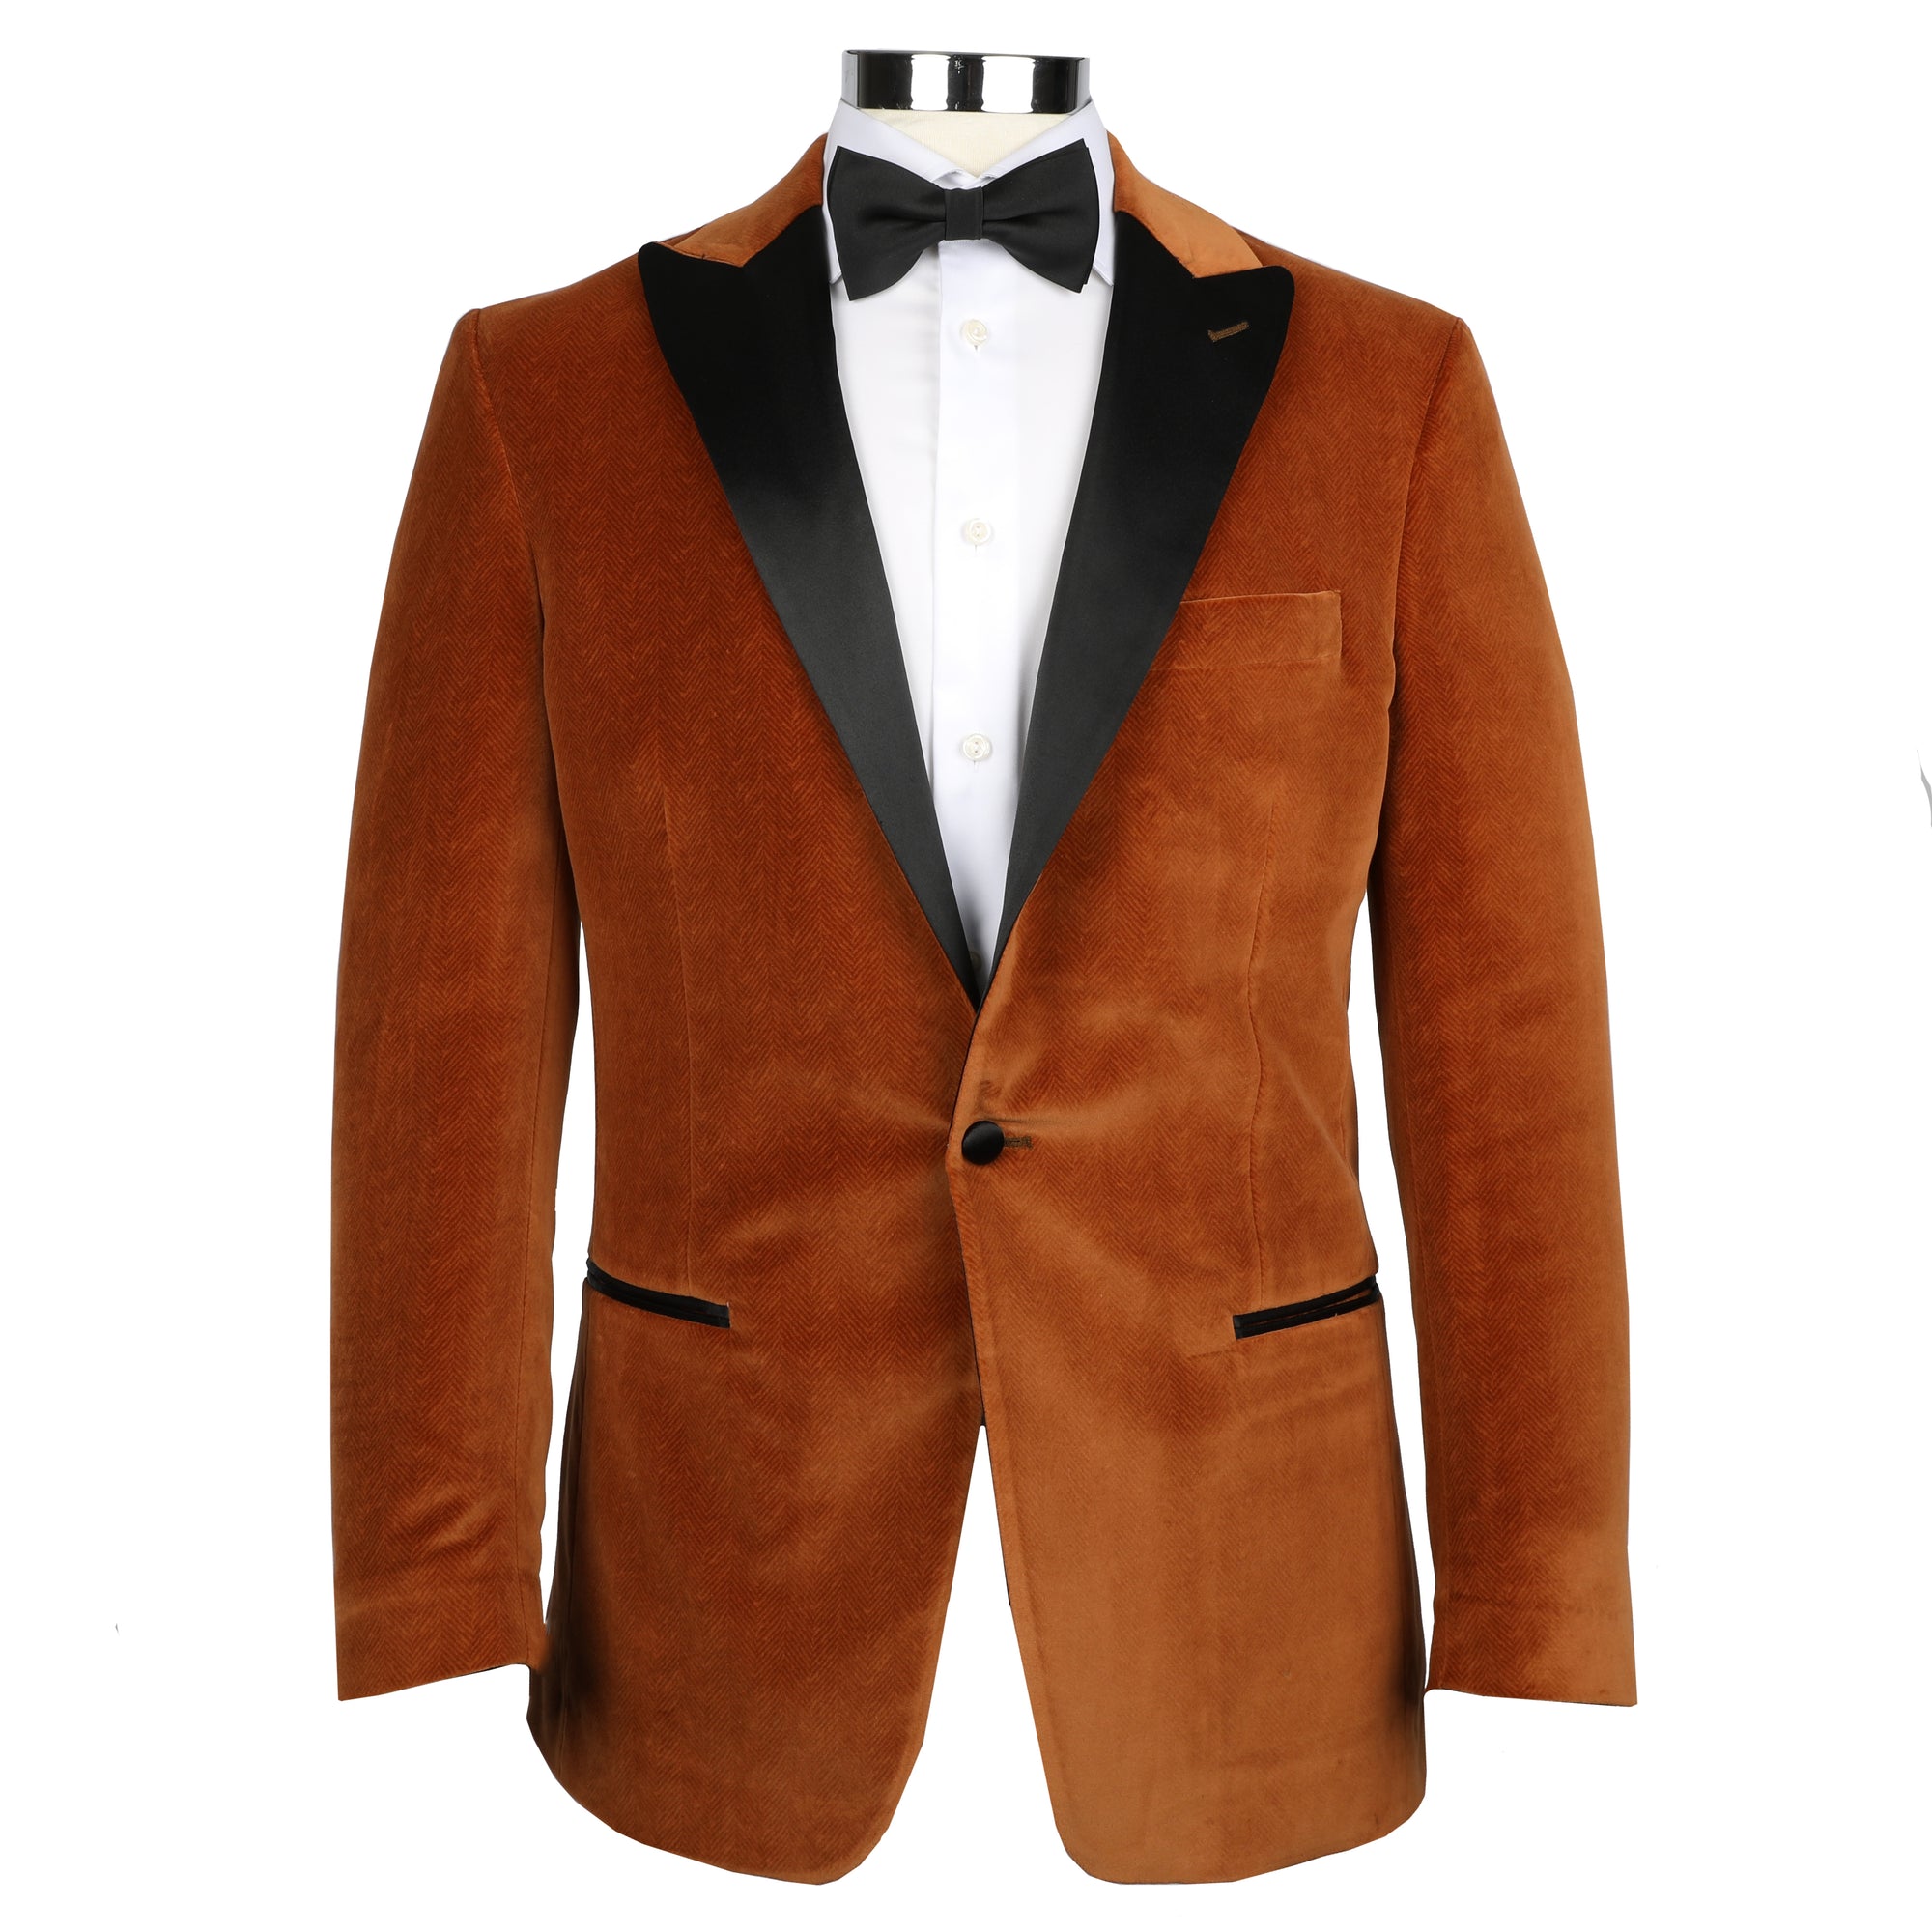 Turn heads and express your style with the Toulouse Tobacco Velvet Dinner Jacket. This retro-inspired jacket is tailored from luxurious velvet, offering an elegant statement piece for any occasion. Its tobacco coloring adds a timeless appeal, perfect for a classic look that stands out.  100% Cotton • Toulouse Tailored Fit • Natural Shoulder • One Button Closure • Satin Trim Besom Pockets • Satin Covered Buttons• Fully Lined • 2 Side Vents • Satin Peak Lapel • Dry Clean Only